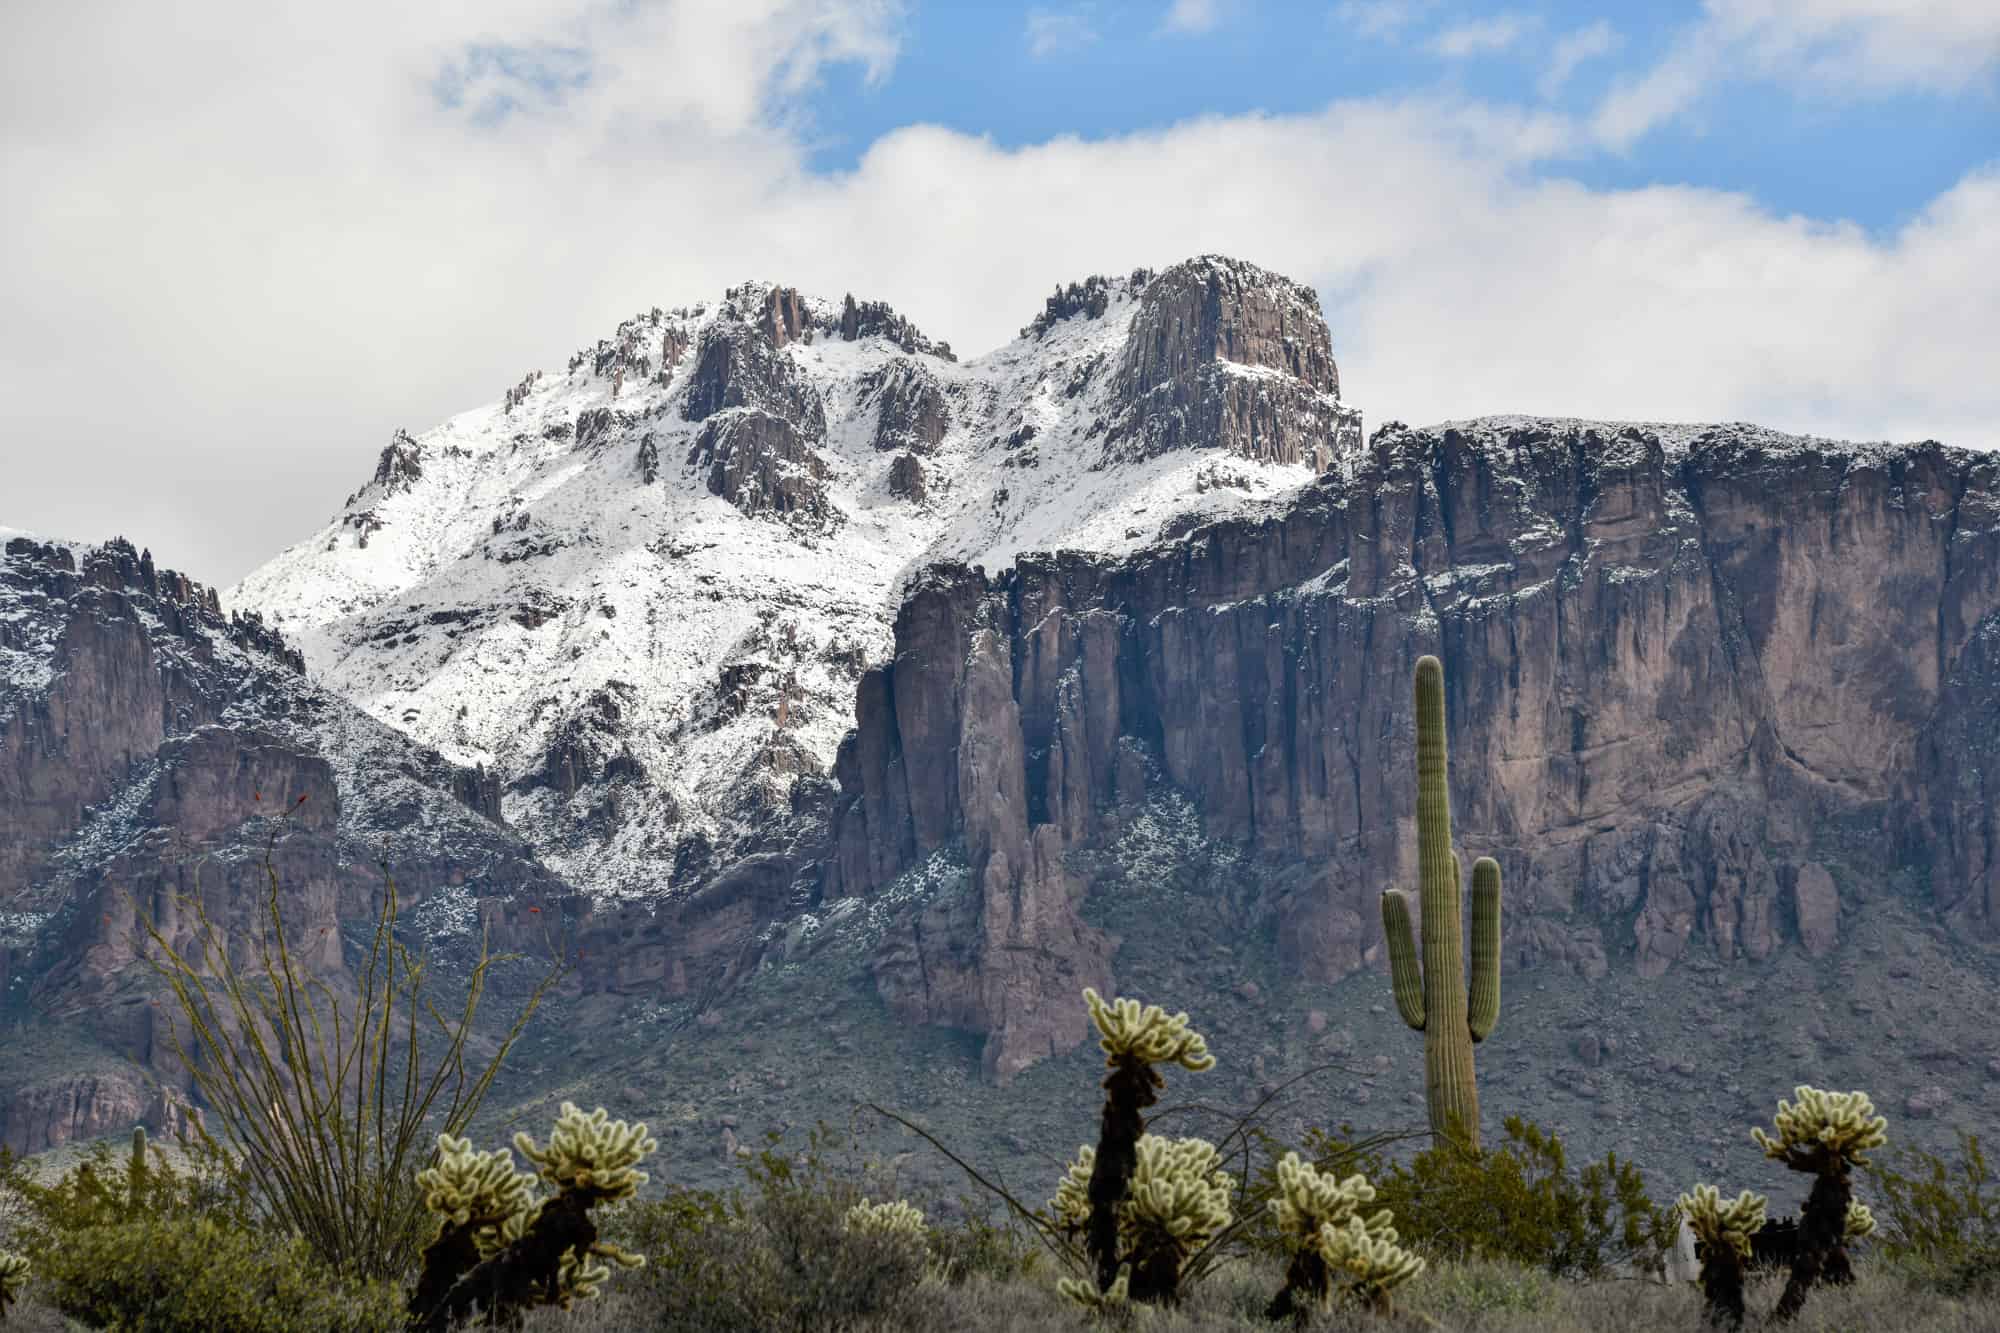 lost dutchman state park is an incredible stop to make when traveling from scottsdale to tombstone - the superstition mountains sits as a backdrop to cactus within the park